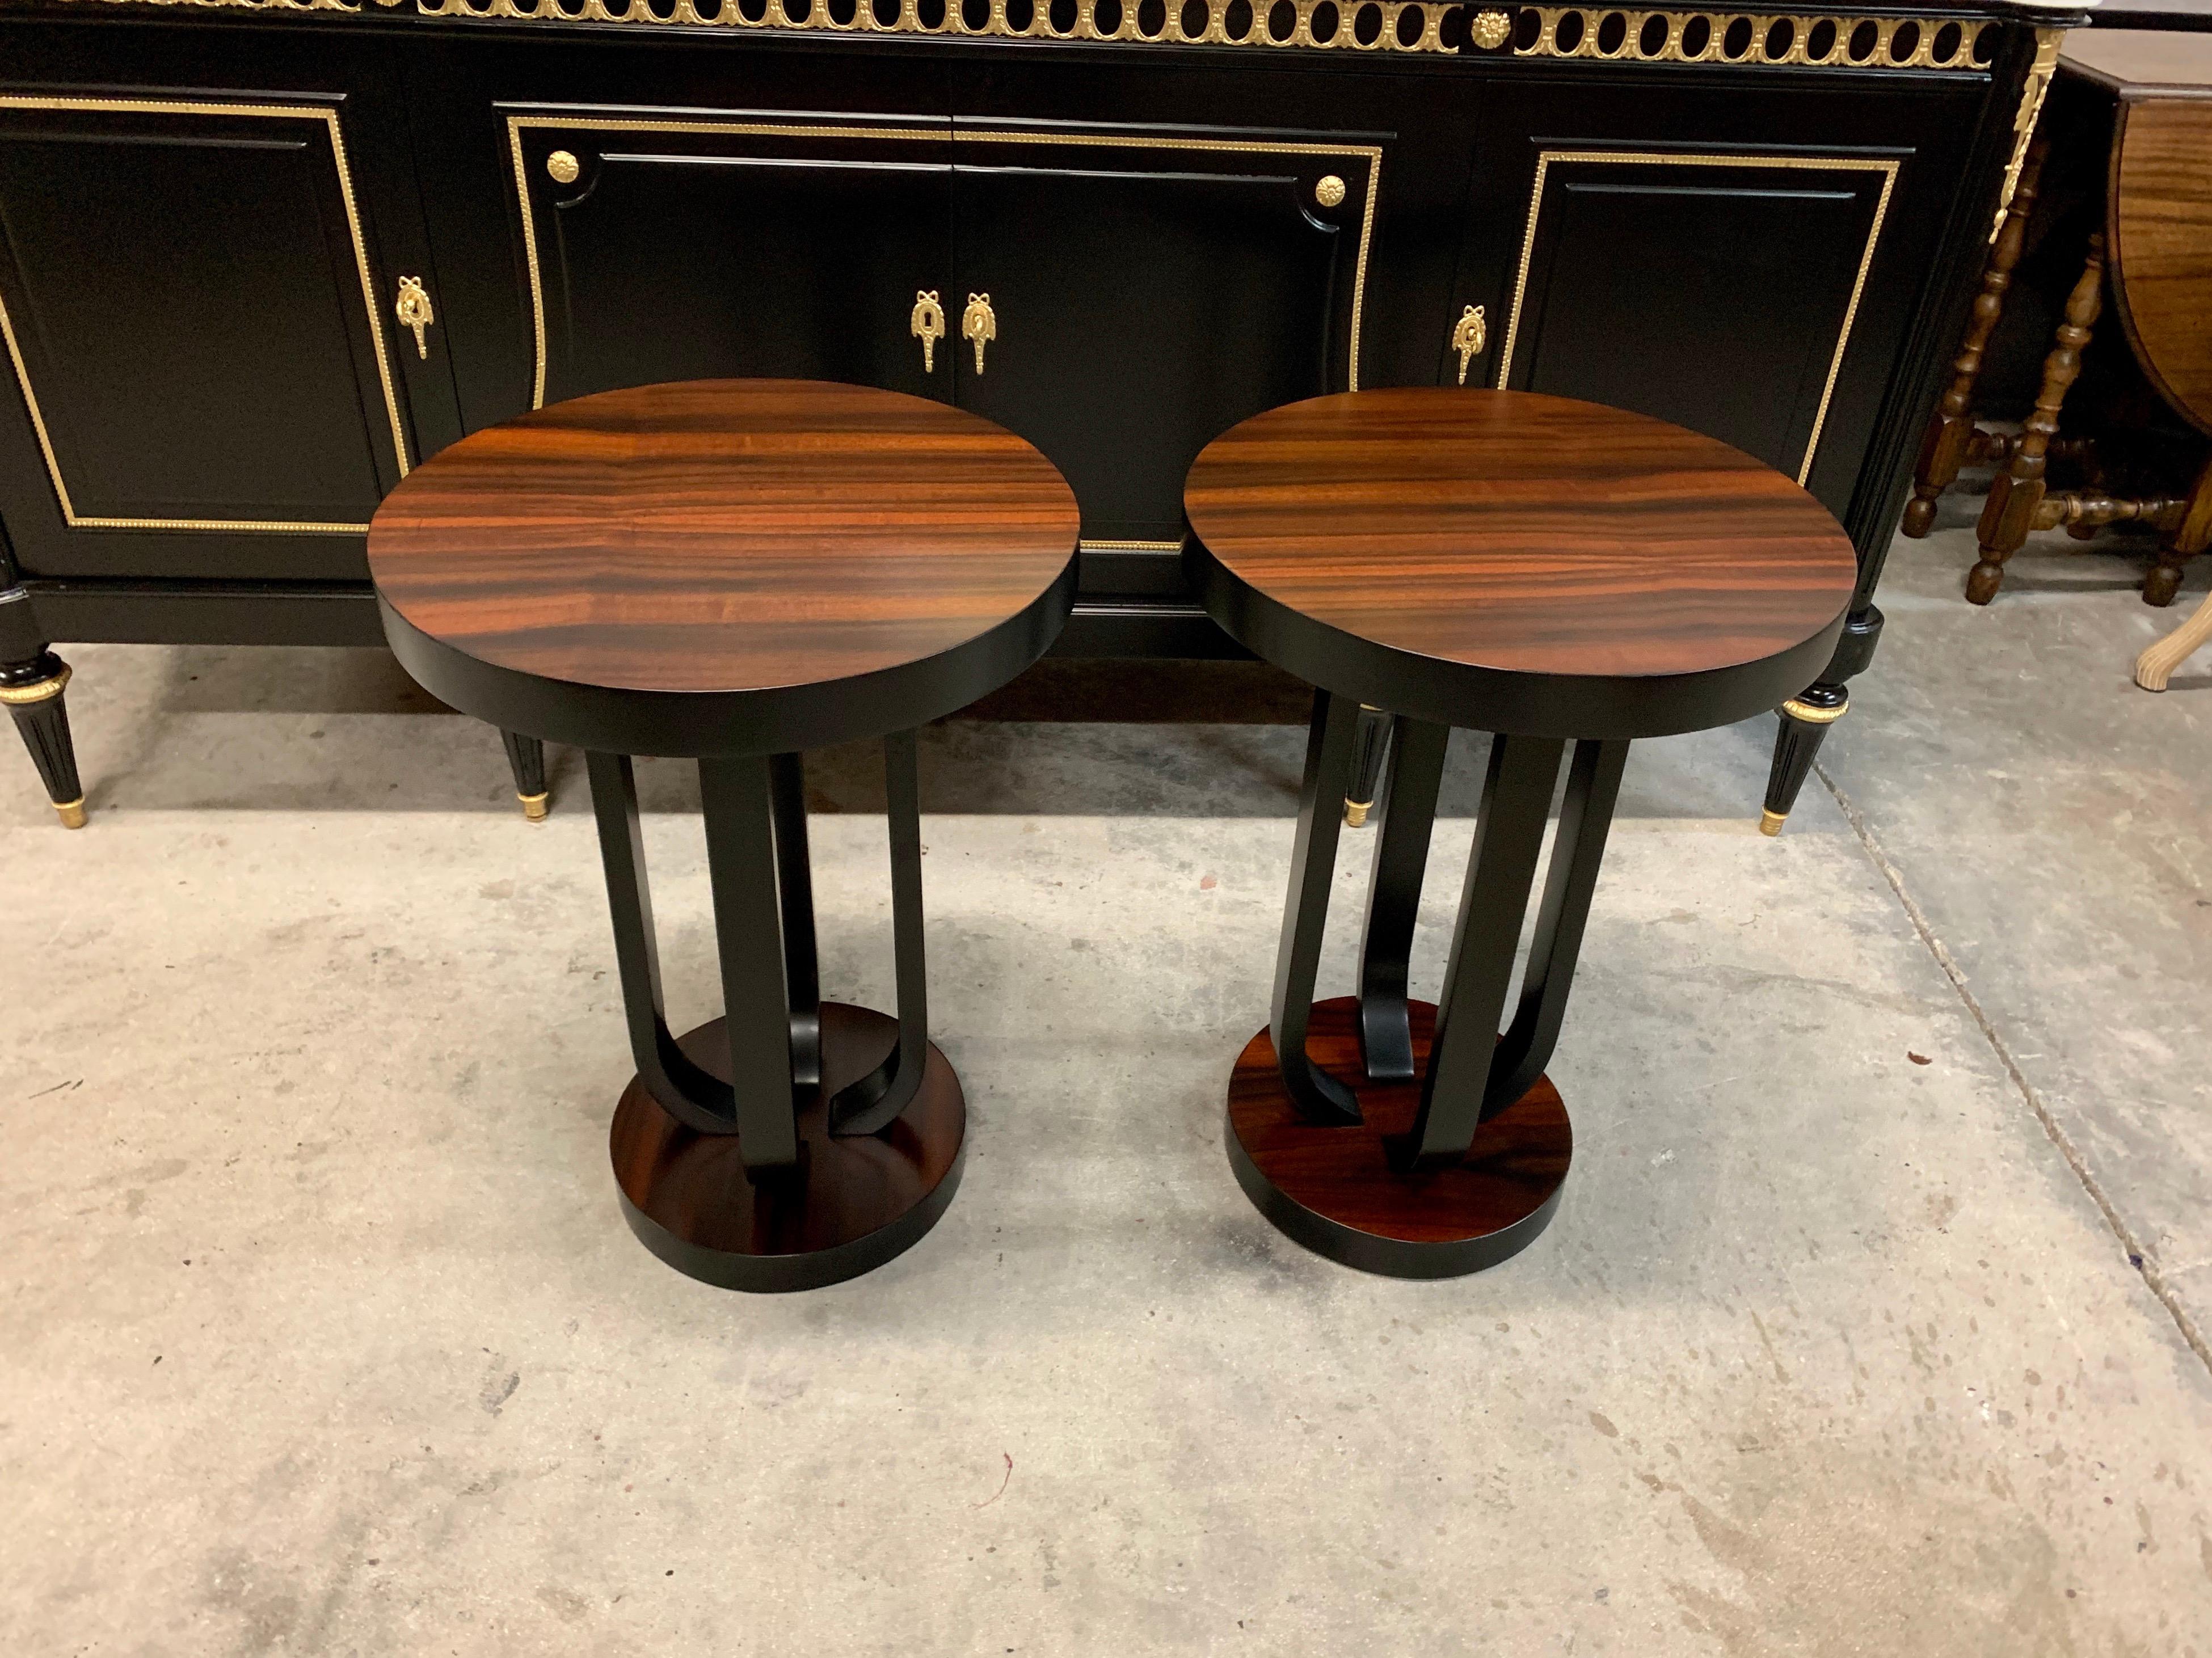 Pair of French Art Deco Macassar ebony side table or coffee table, circa 1940s. The table are with a French finish, that rest on makes it ideal next to a chair or for use as a bedside table. Size: 27.88 height x 19.88 diameter.